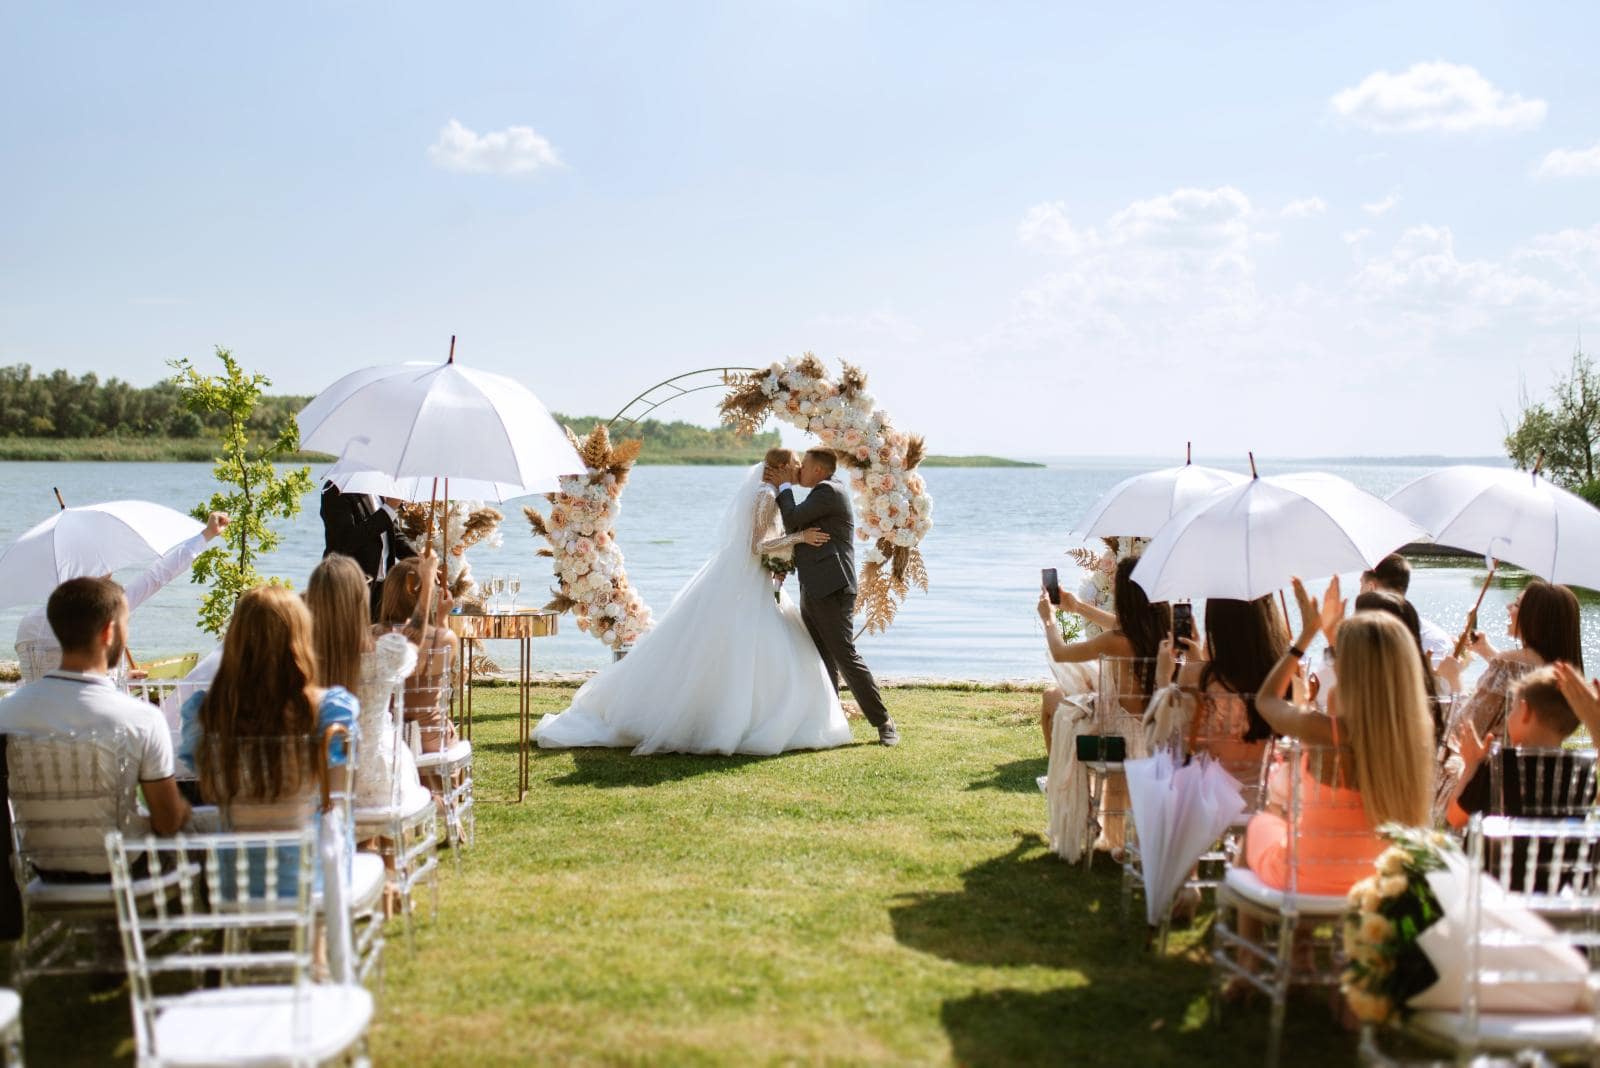 An outdoor wedding ceremony in a grassy area beside a lake.